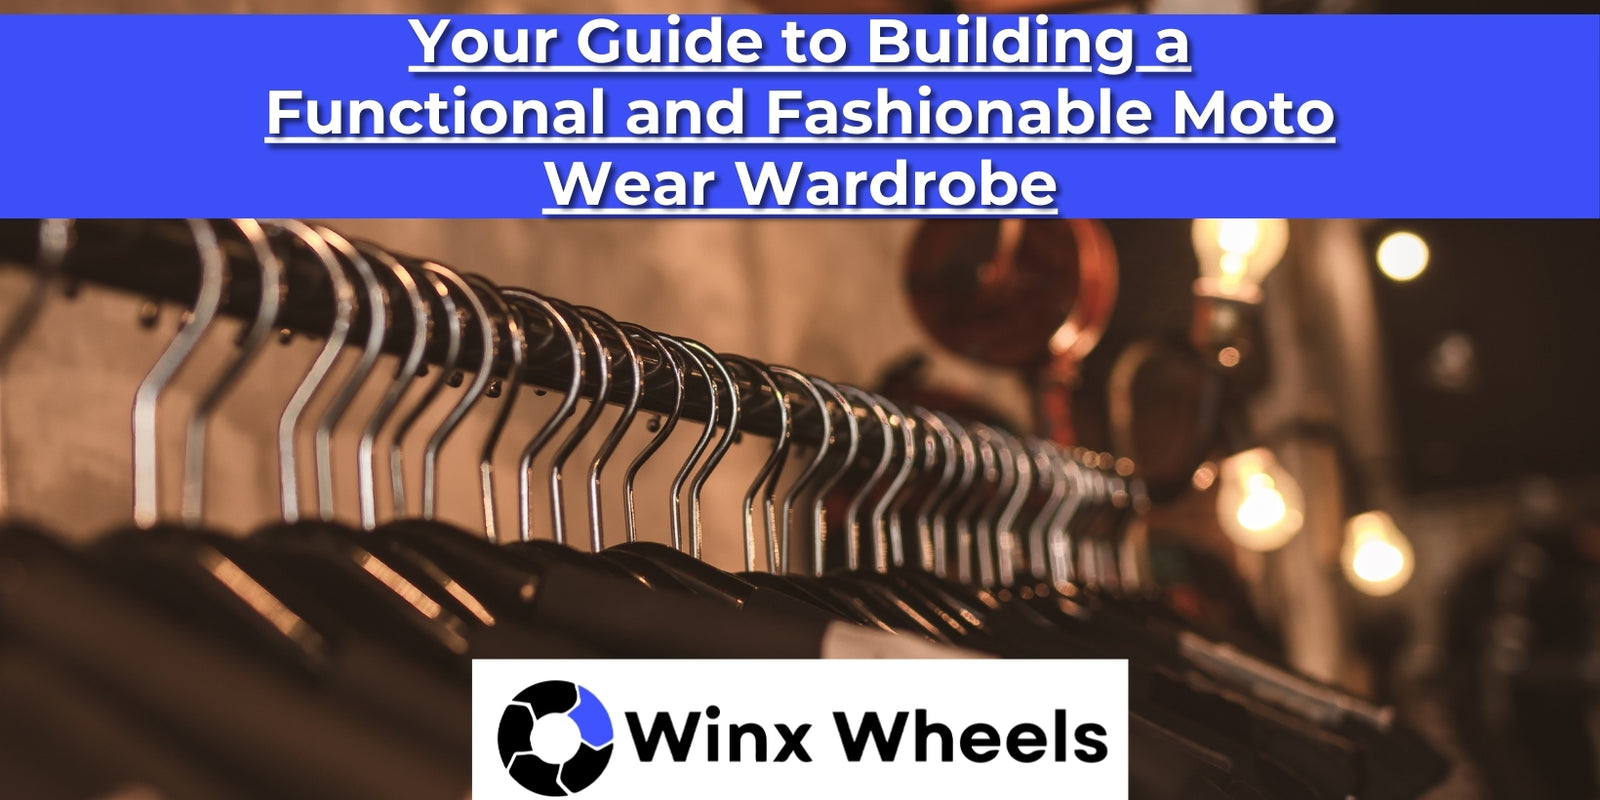 Your Guide to Building a Functional and Fashionable Moto Wear Wardrobe